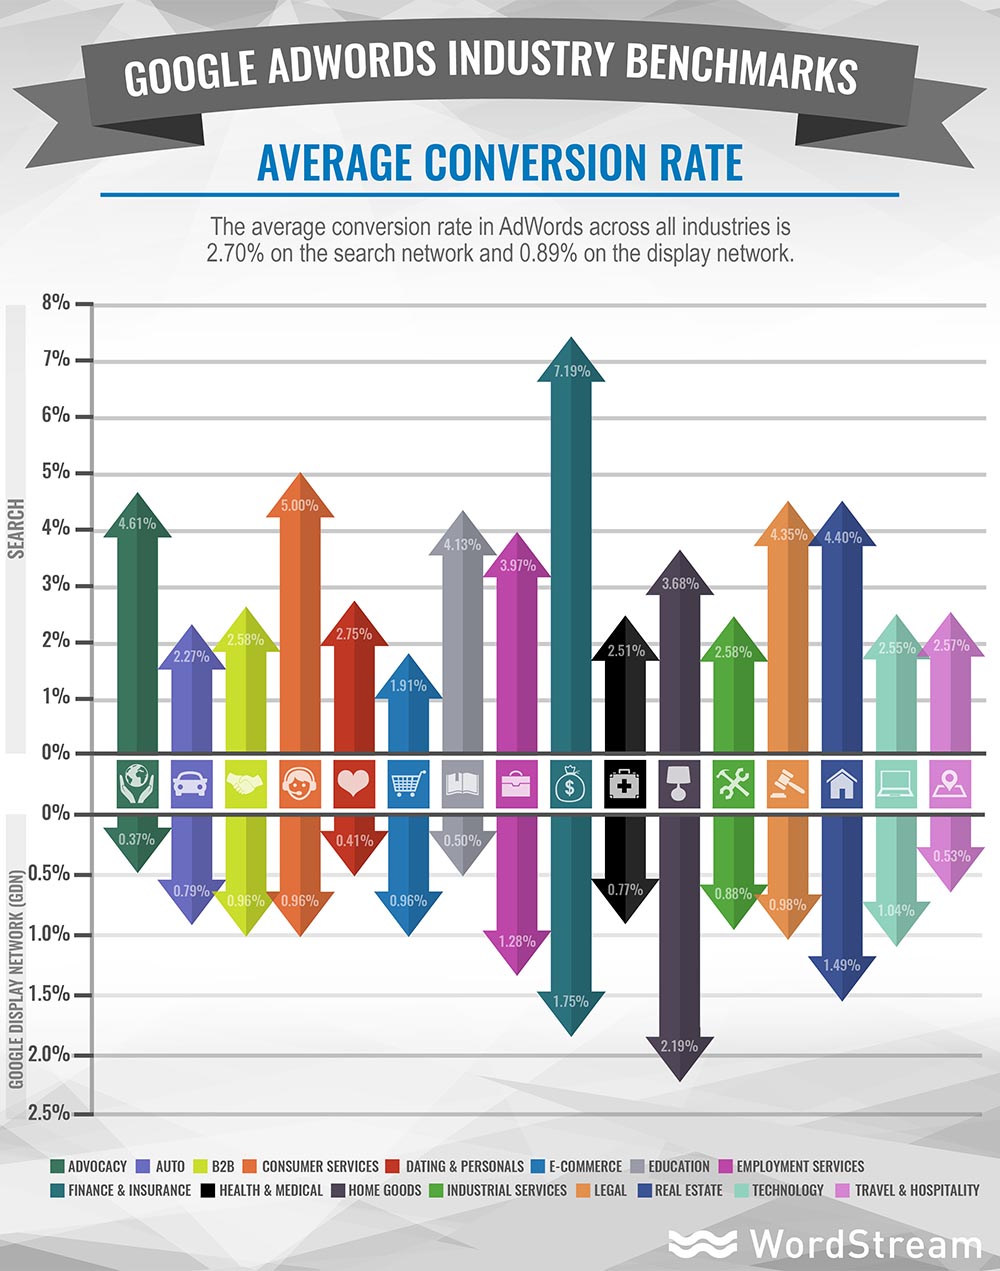 Average Conversion Rate per Industry